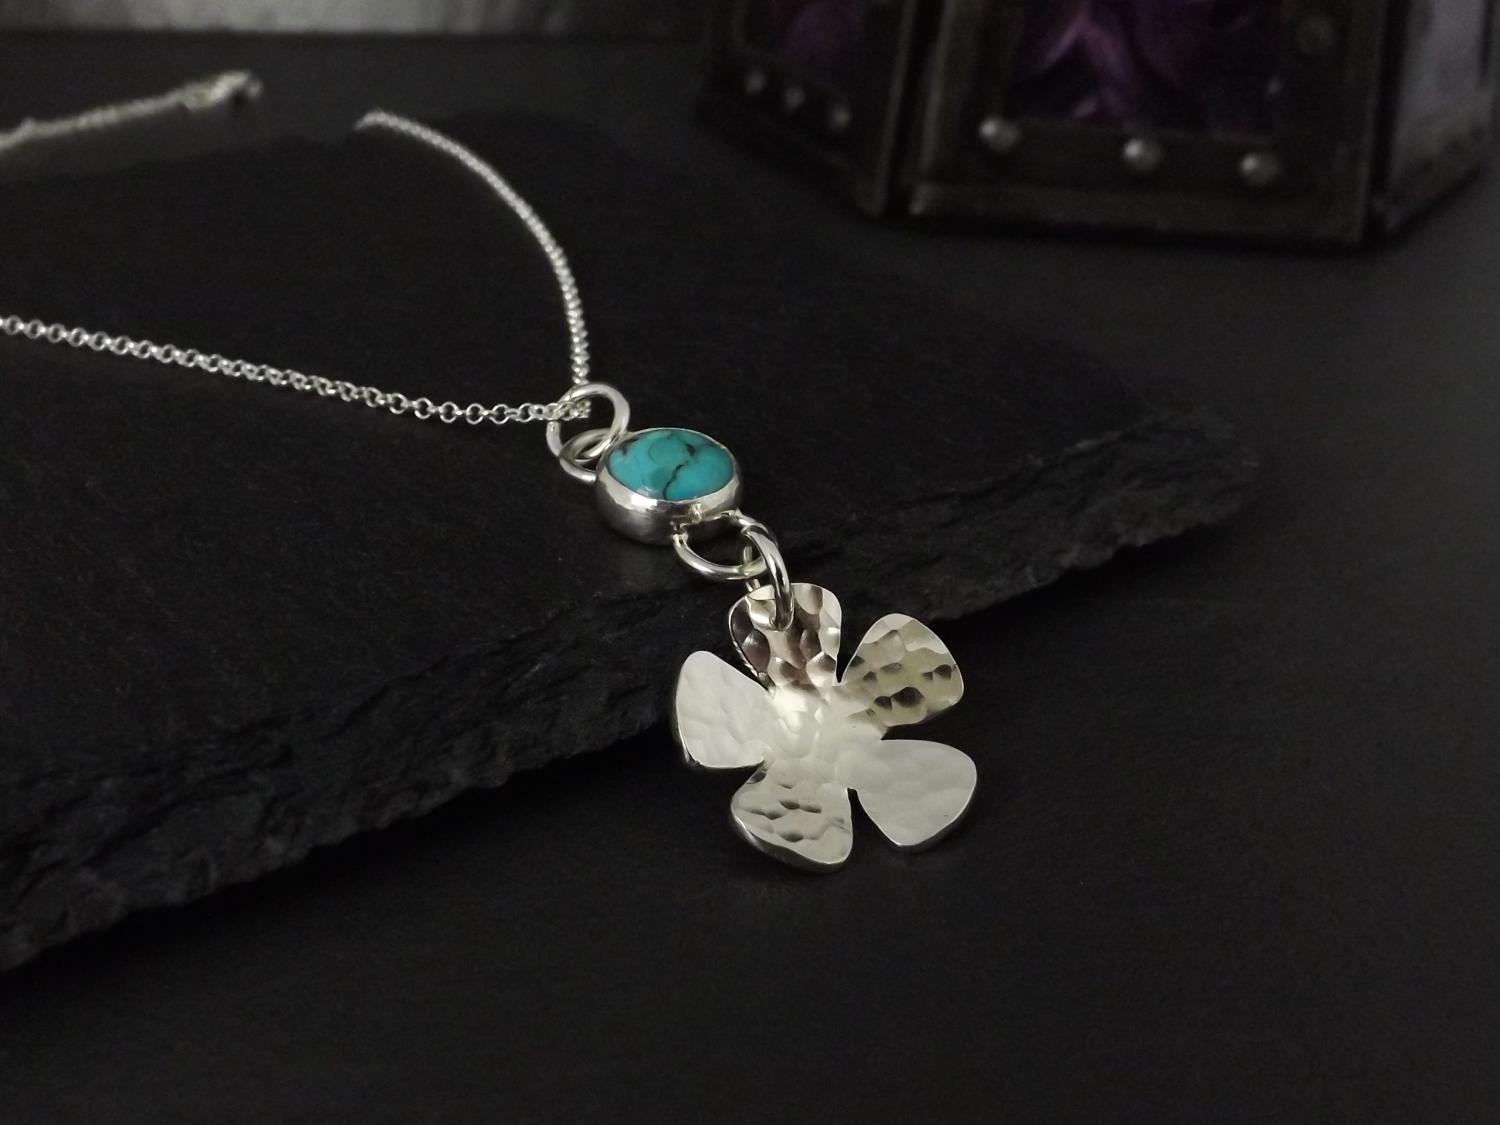 Turquoise and Flower Hammered Silver Pendant Necklace